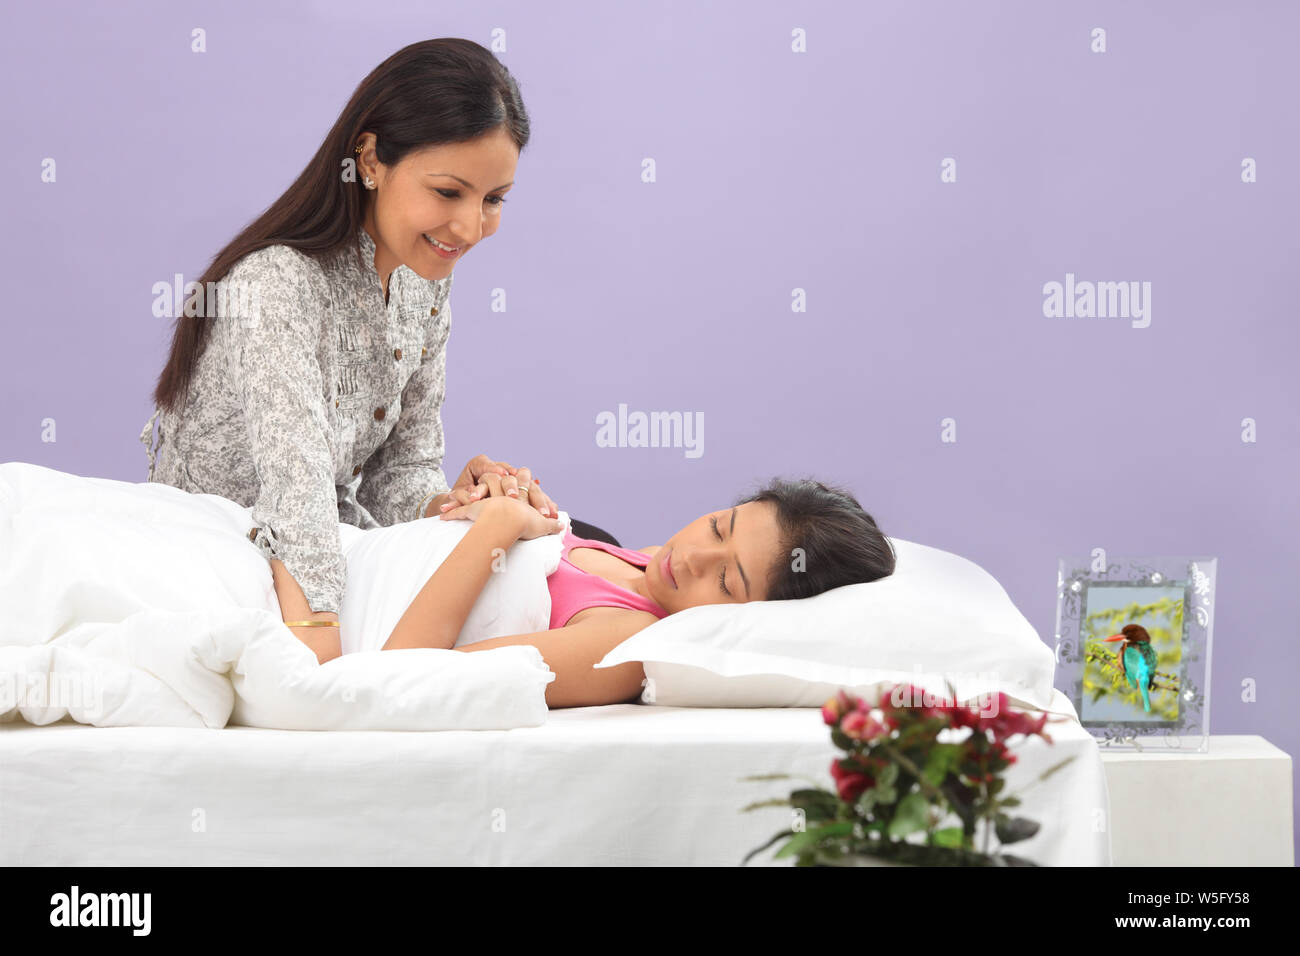 Woman caring for her daughter while sleeping Stock Photo